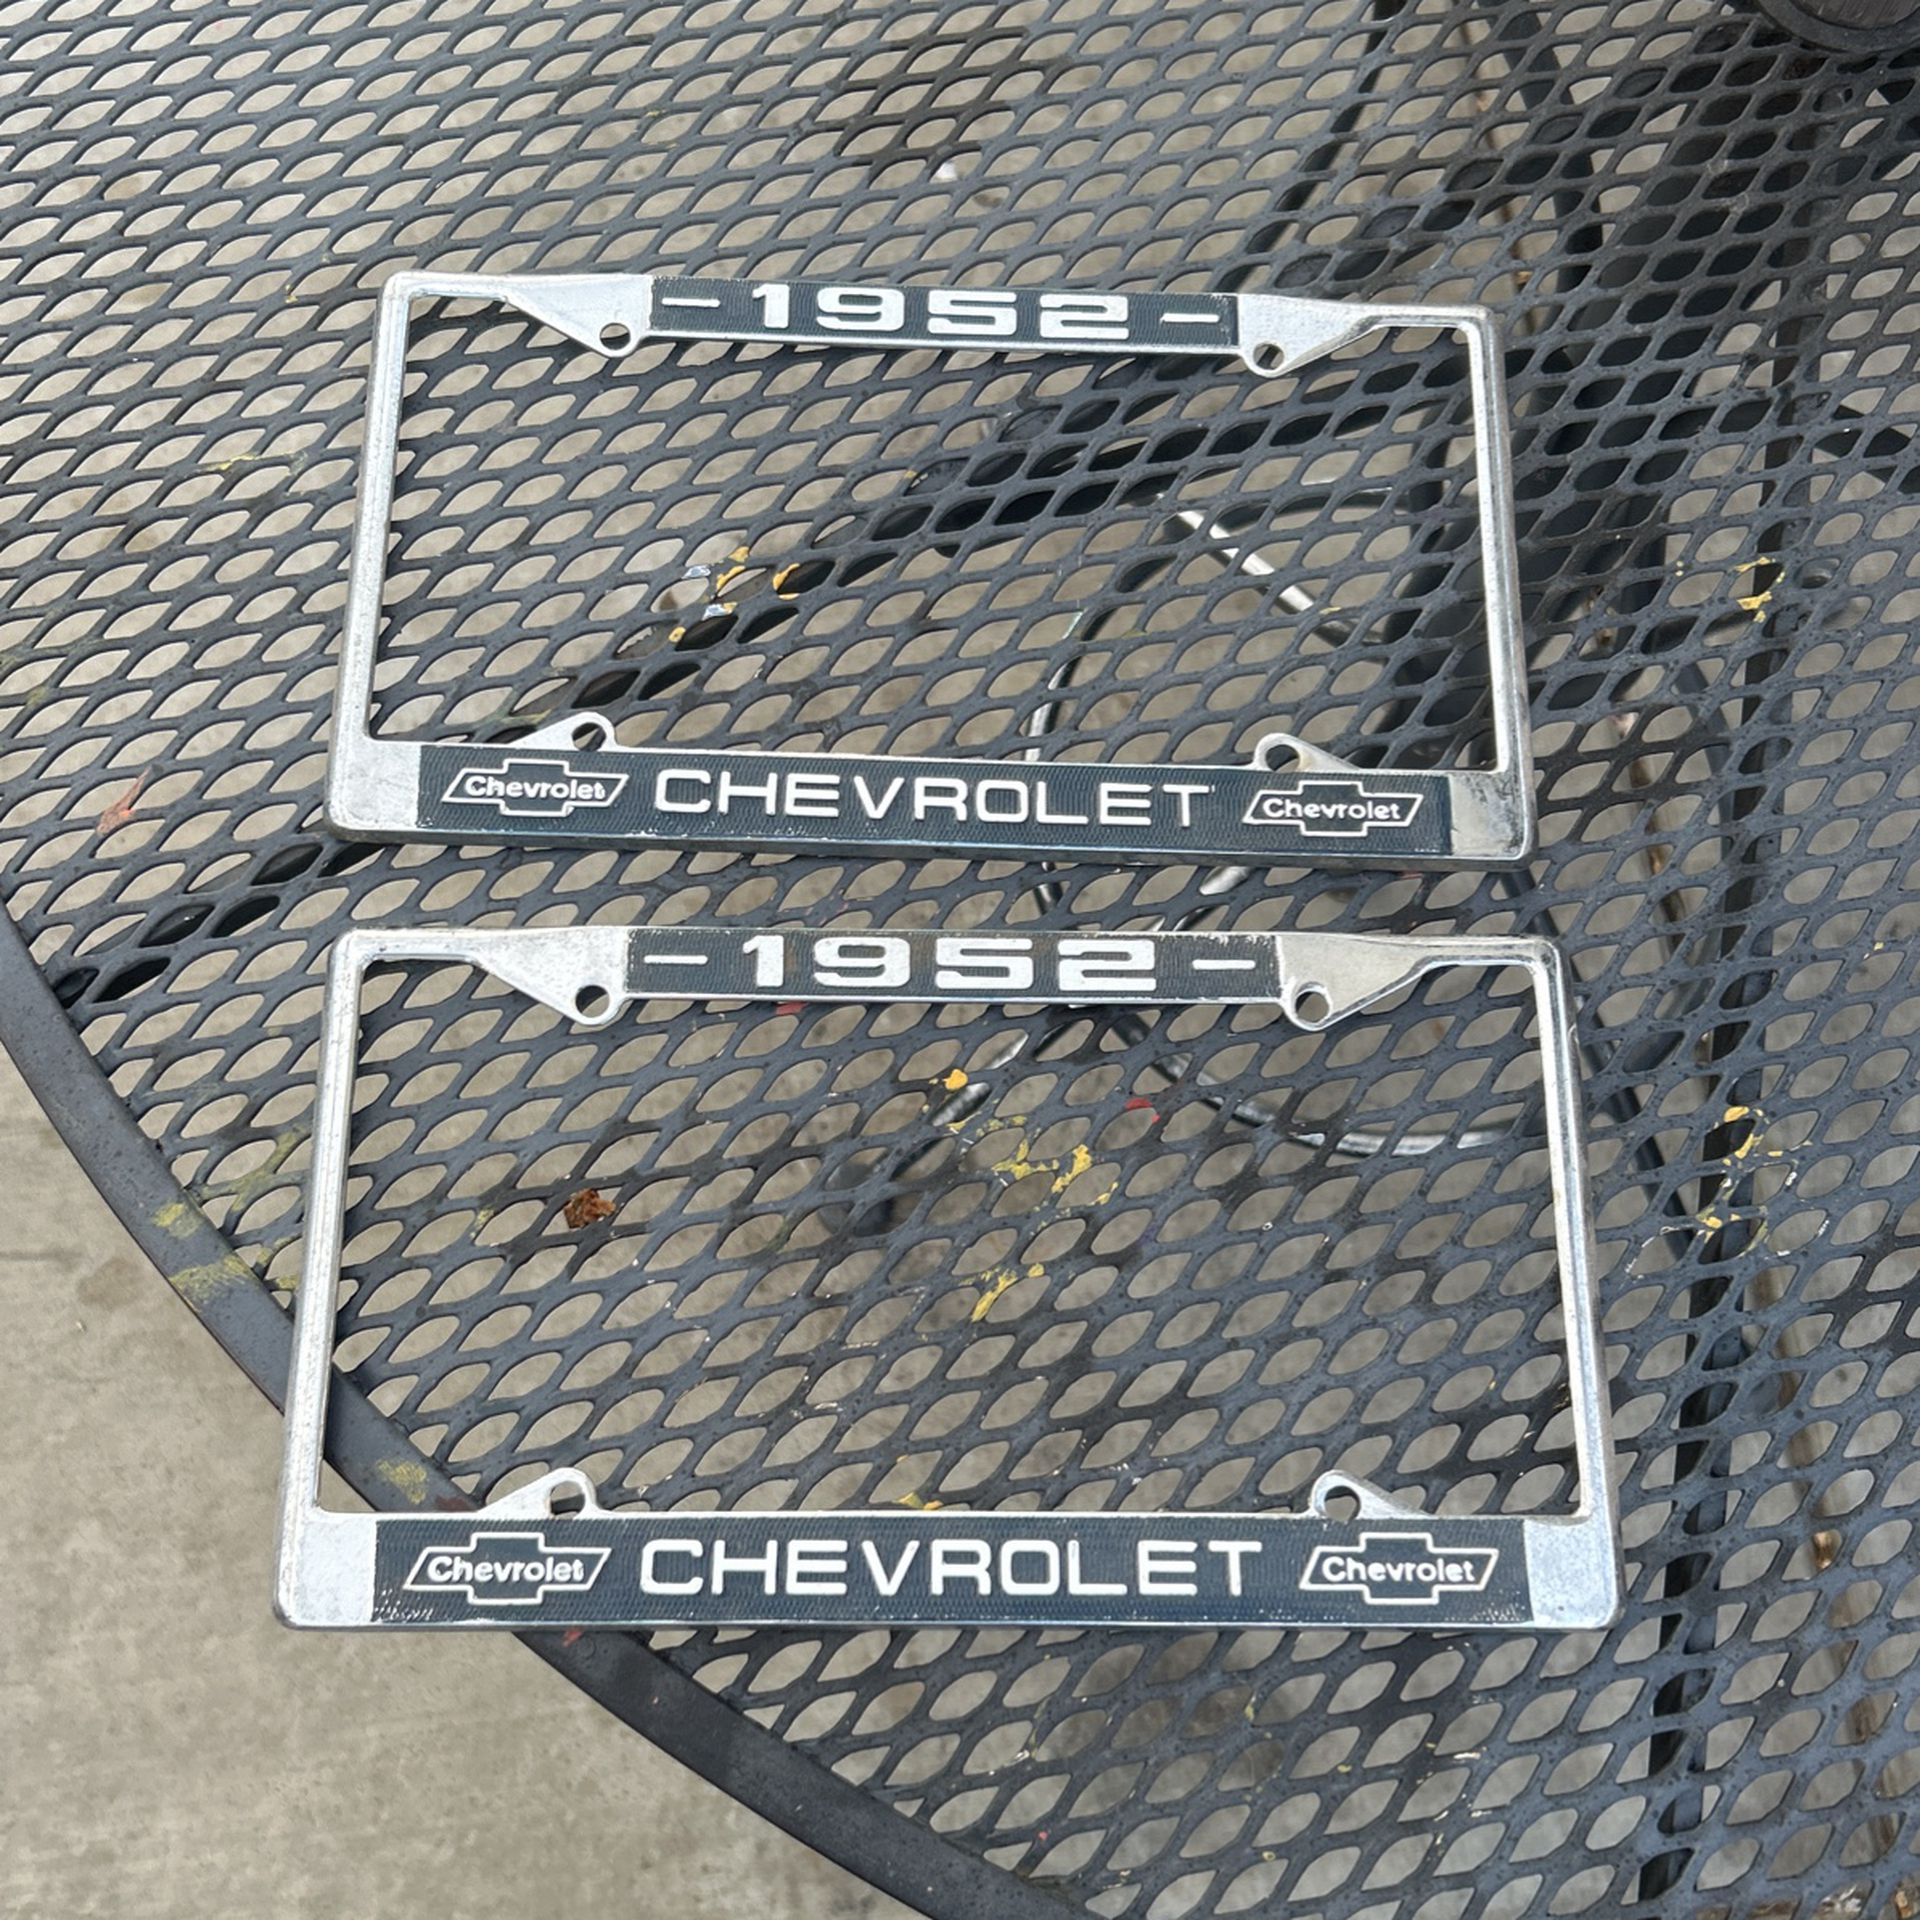 1952 Chevy License Plate (Metal)